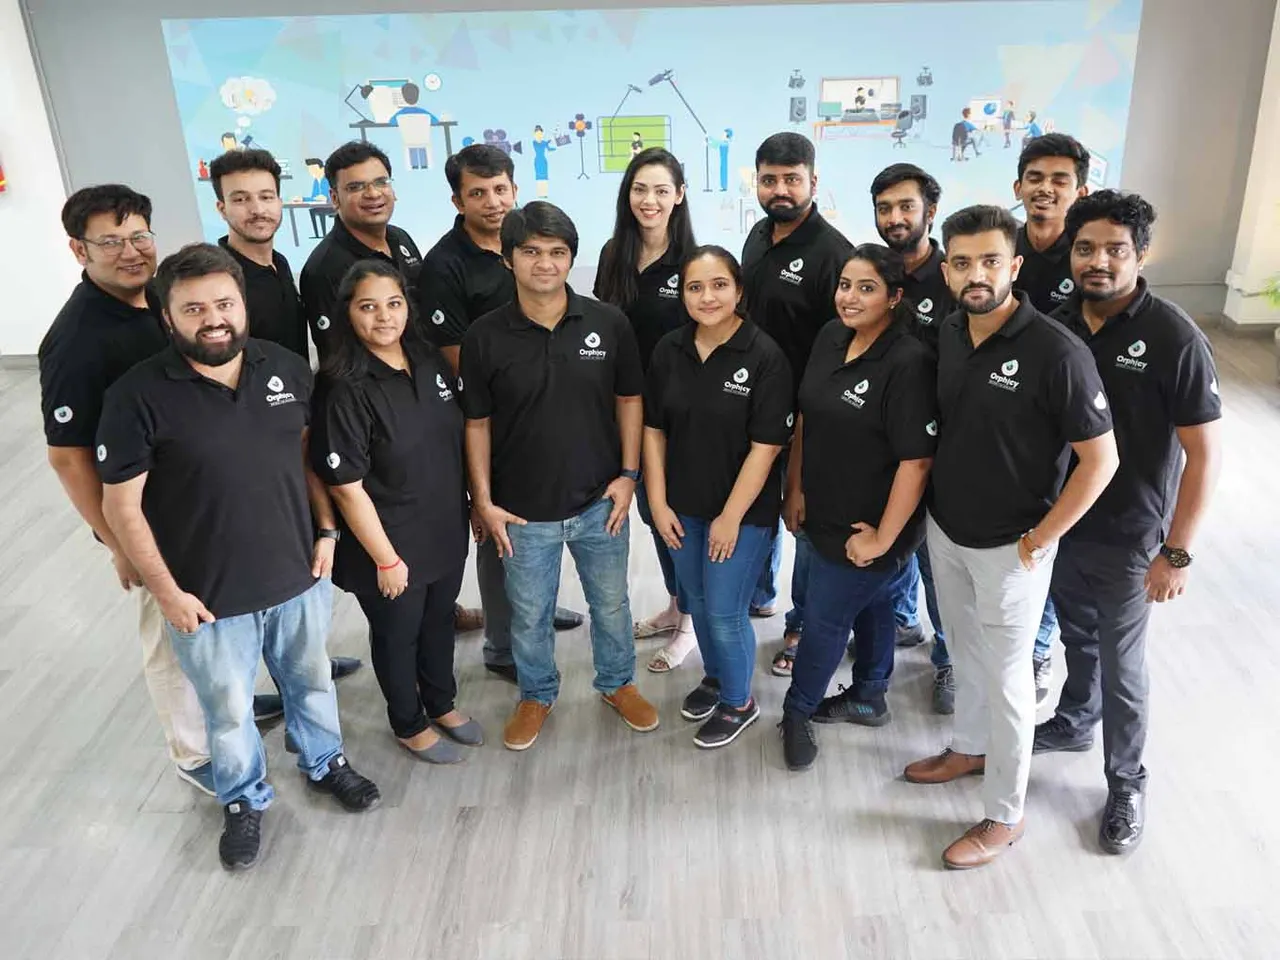 EdTech startup Orphicy raises Rs 2.5 crore at a valuation of Rs 25 crore from NRI tech enthusiasts